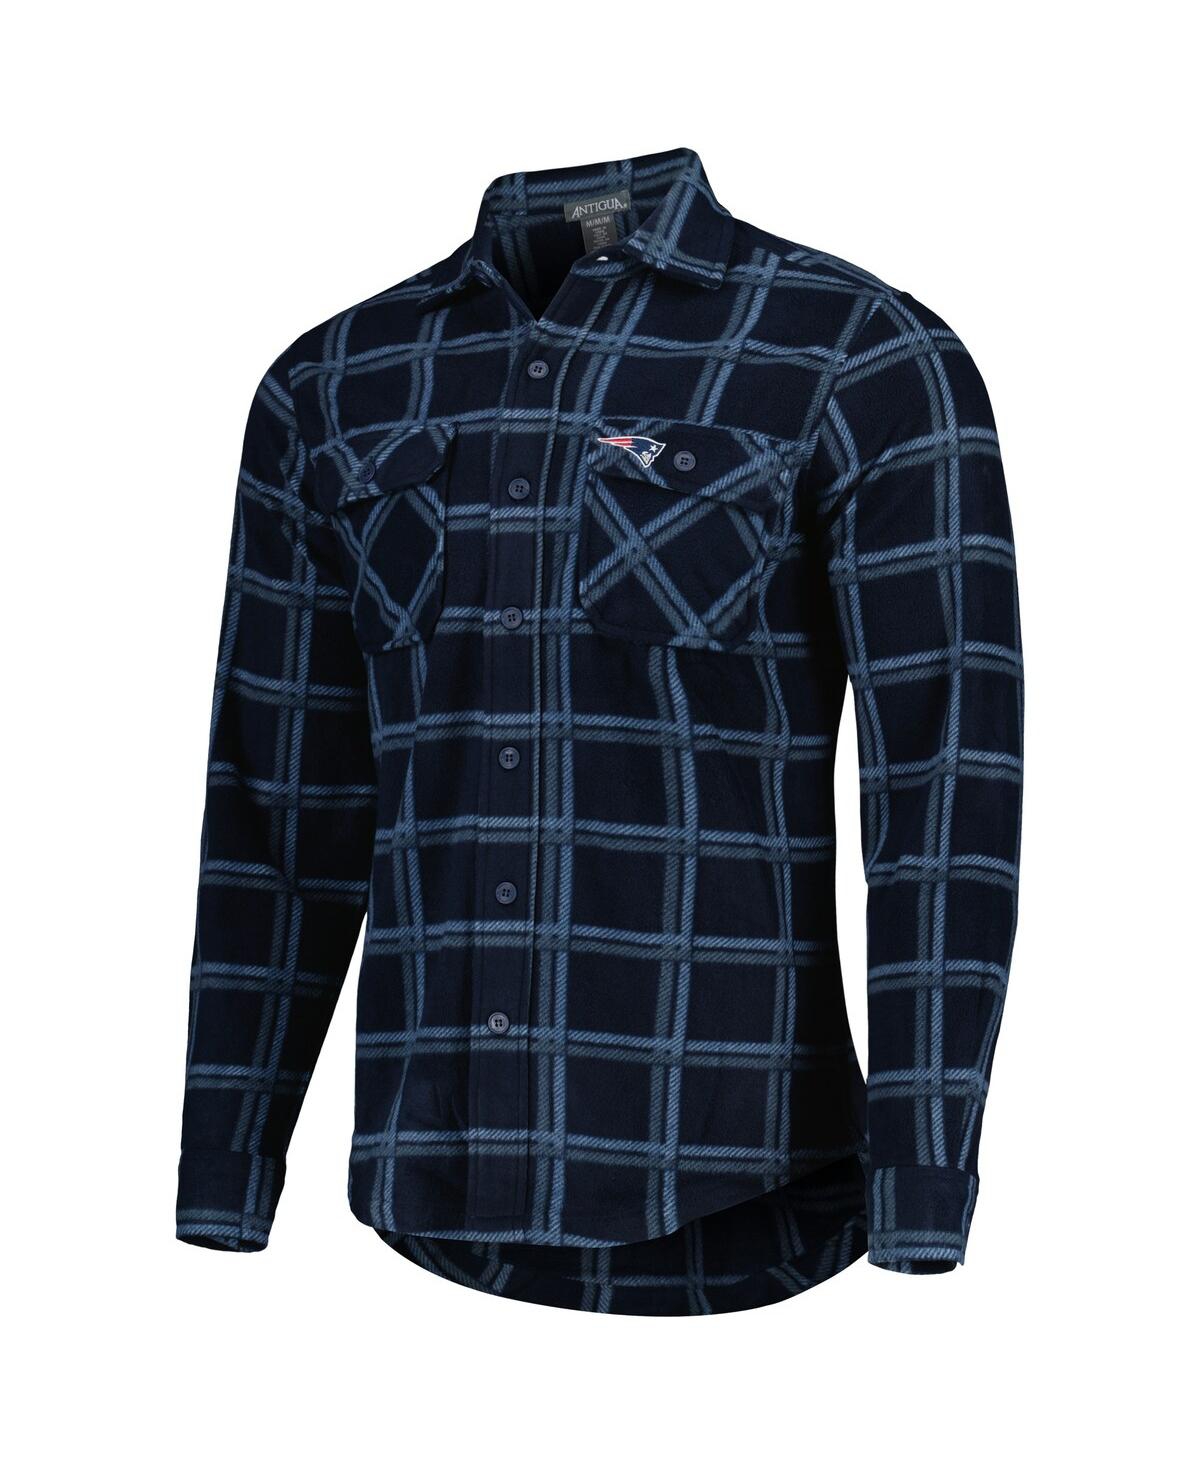 Shop Antigua Men's  Navy New England Patriots Industry Flannel Button-up Shirt Jacket